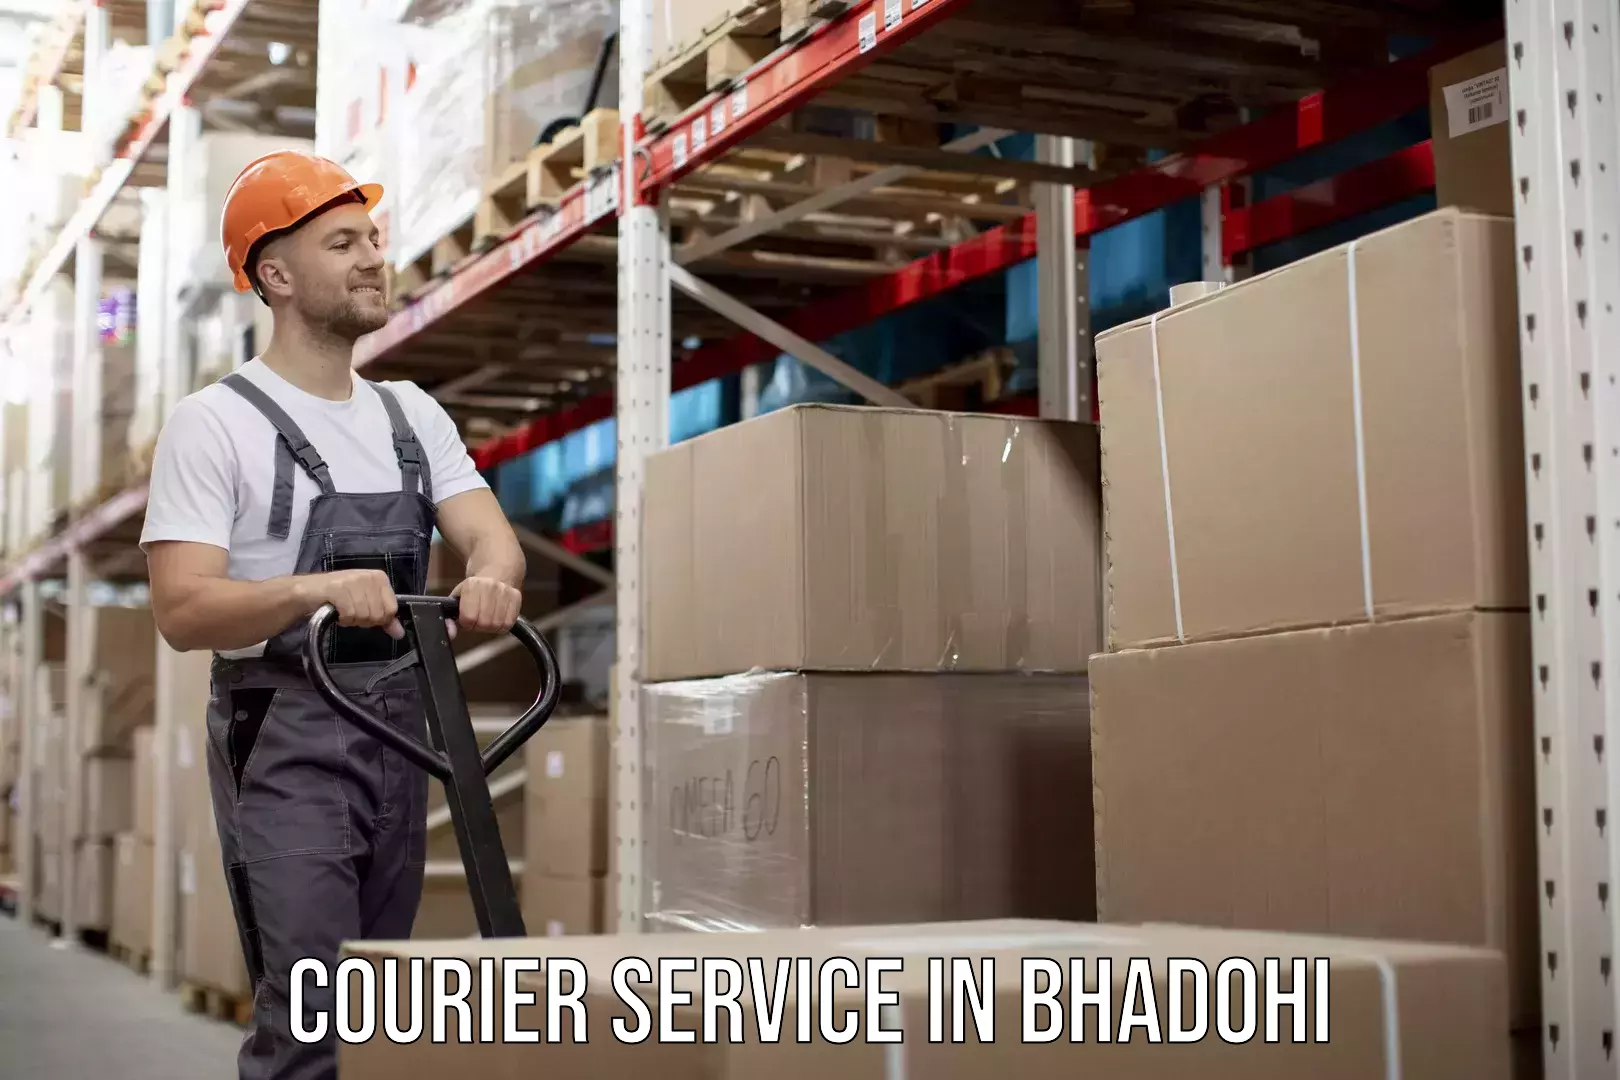 Flexible delivery schedules in Bhadohi